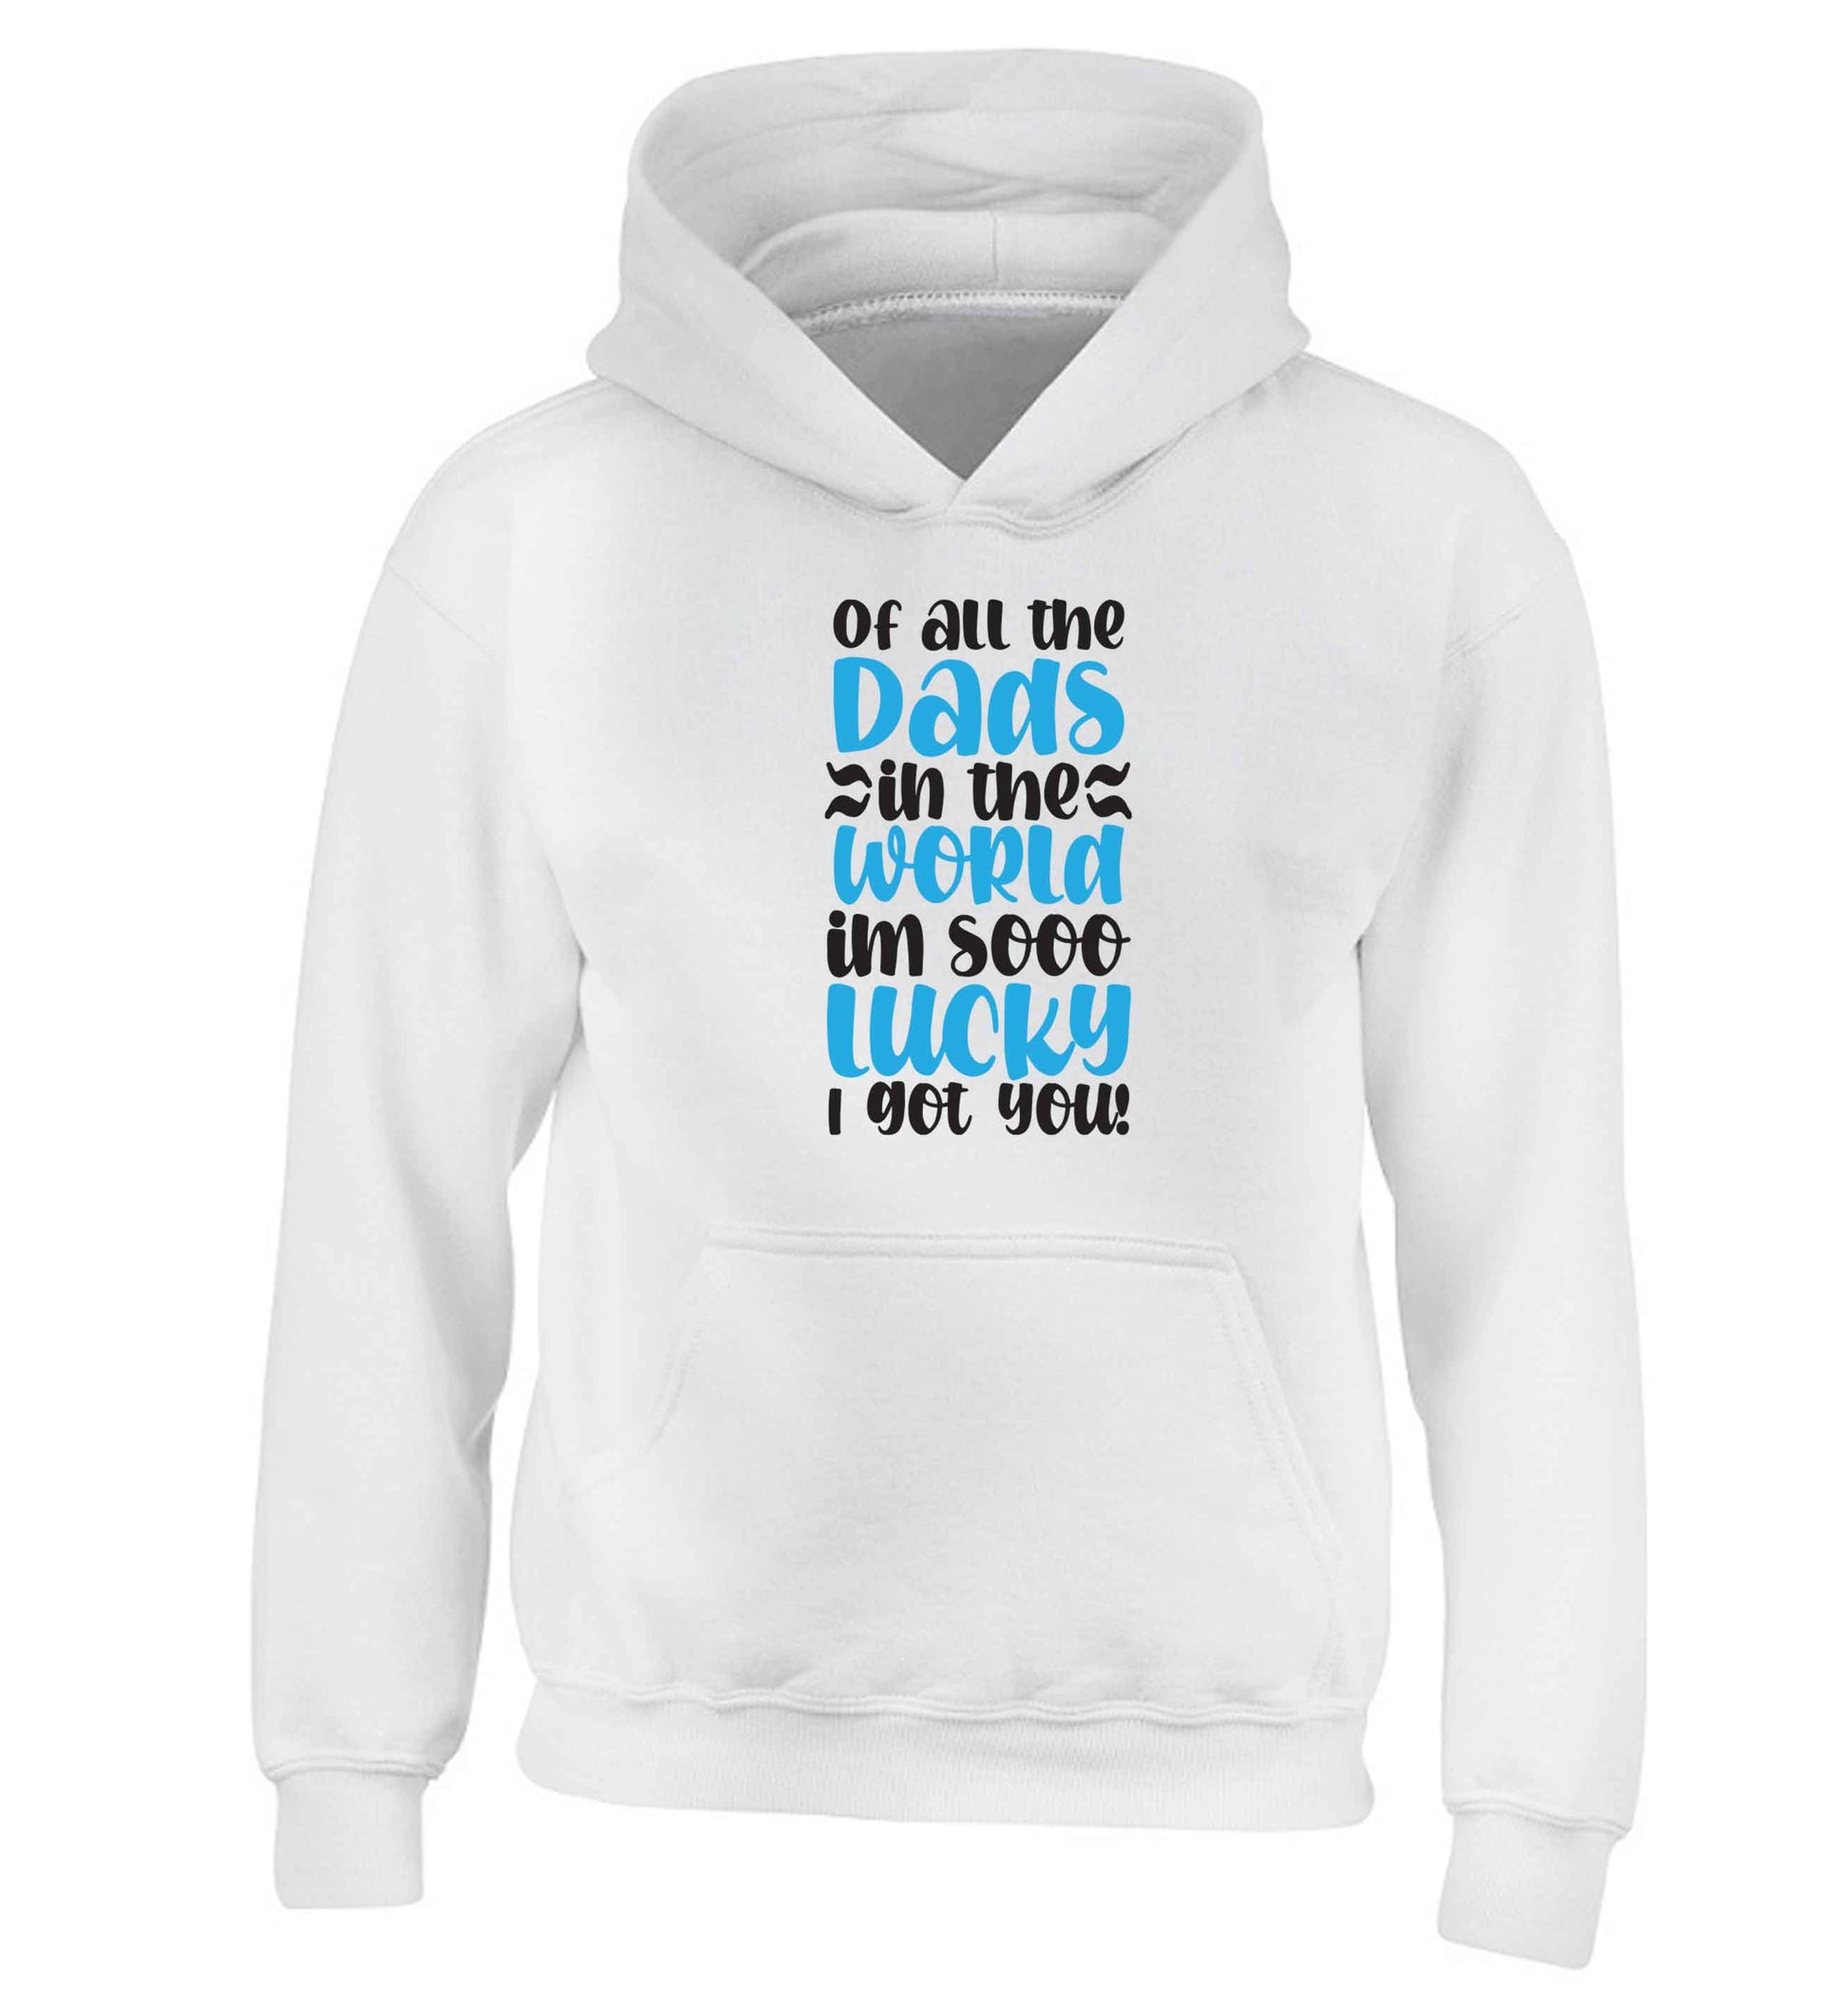 I'm as lucky as can be the worlds greatest dad belongs to me! children's white hoodie 12-13 Years